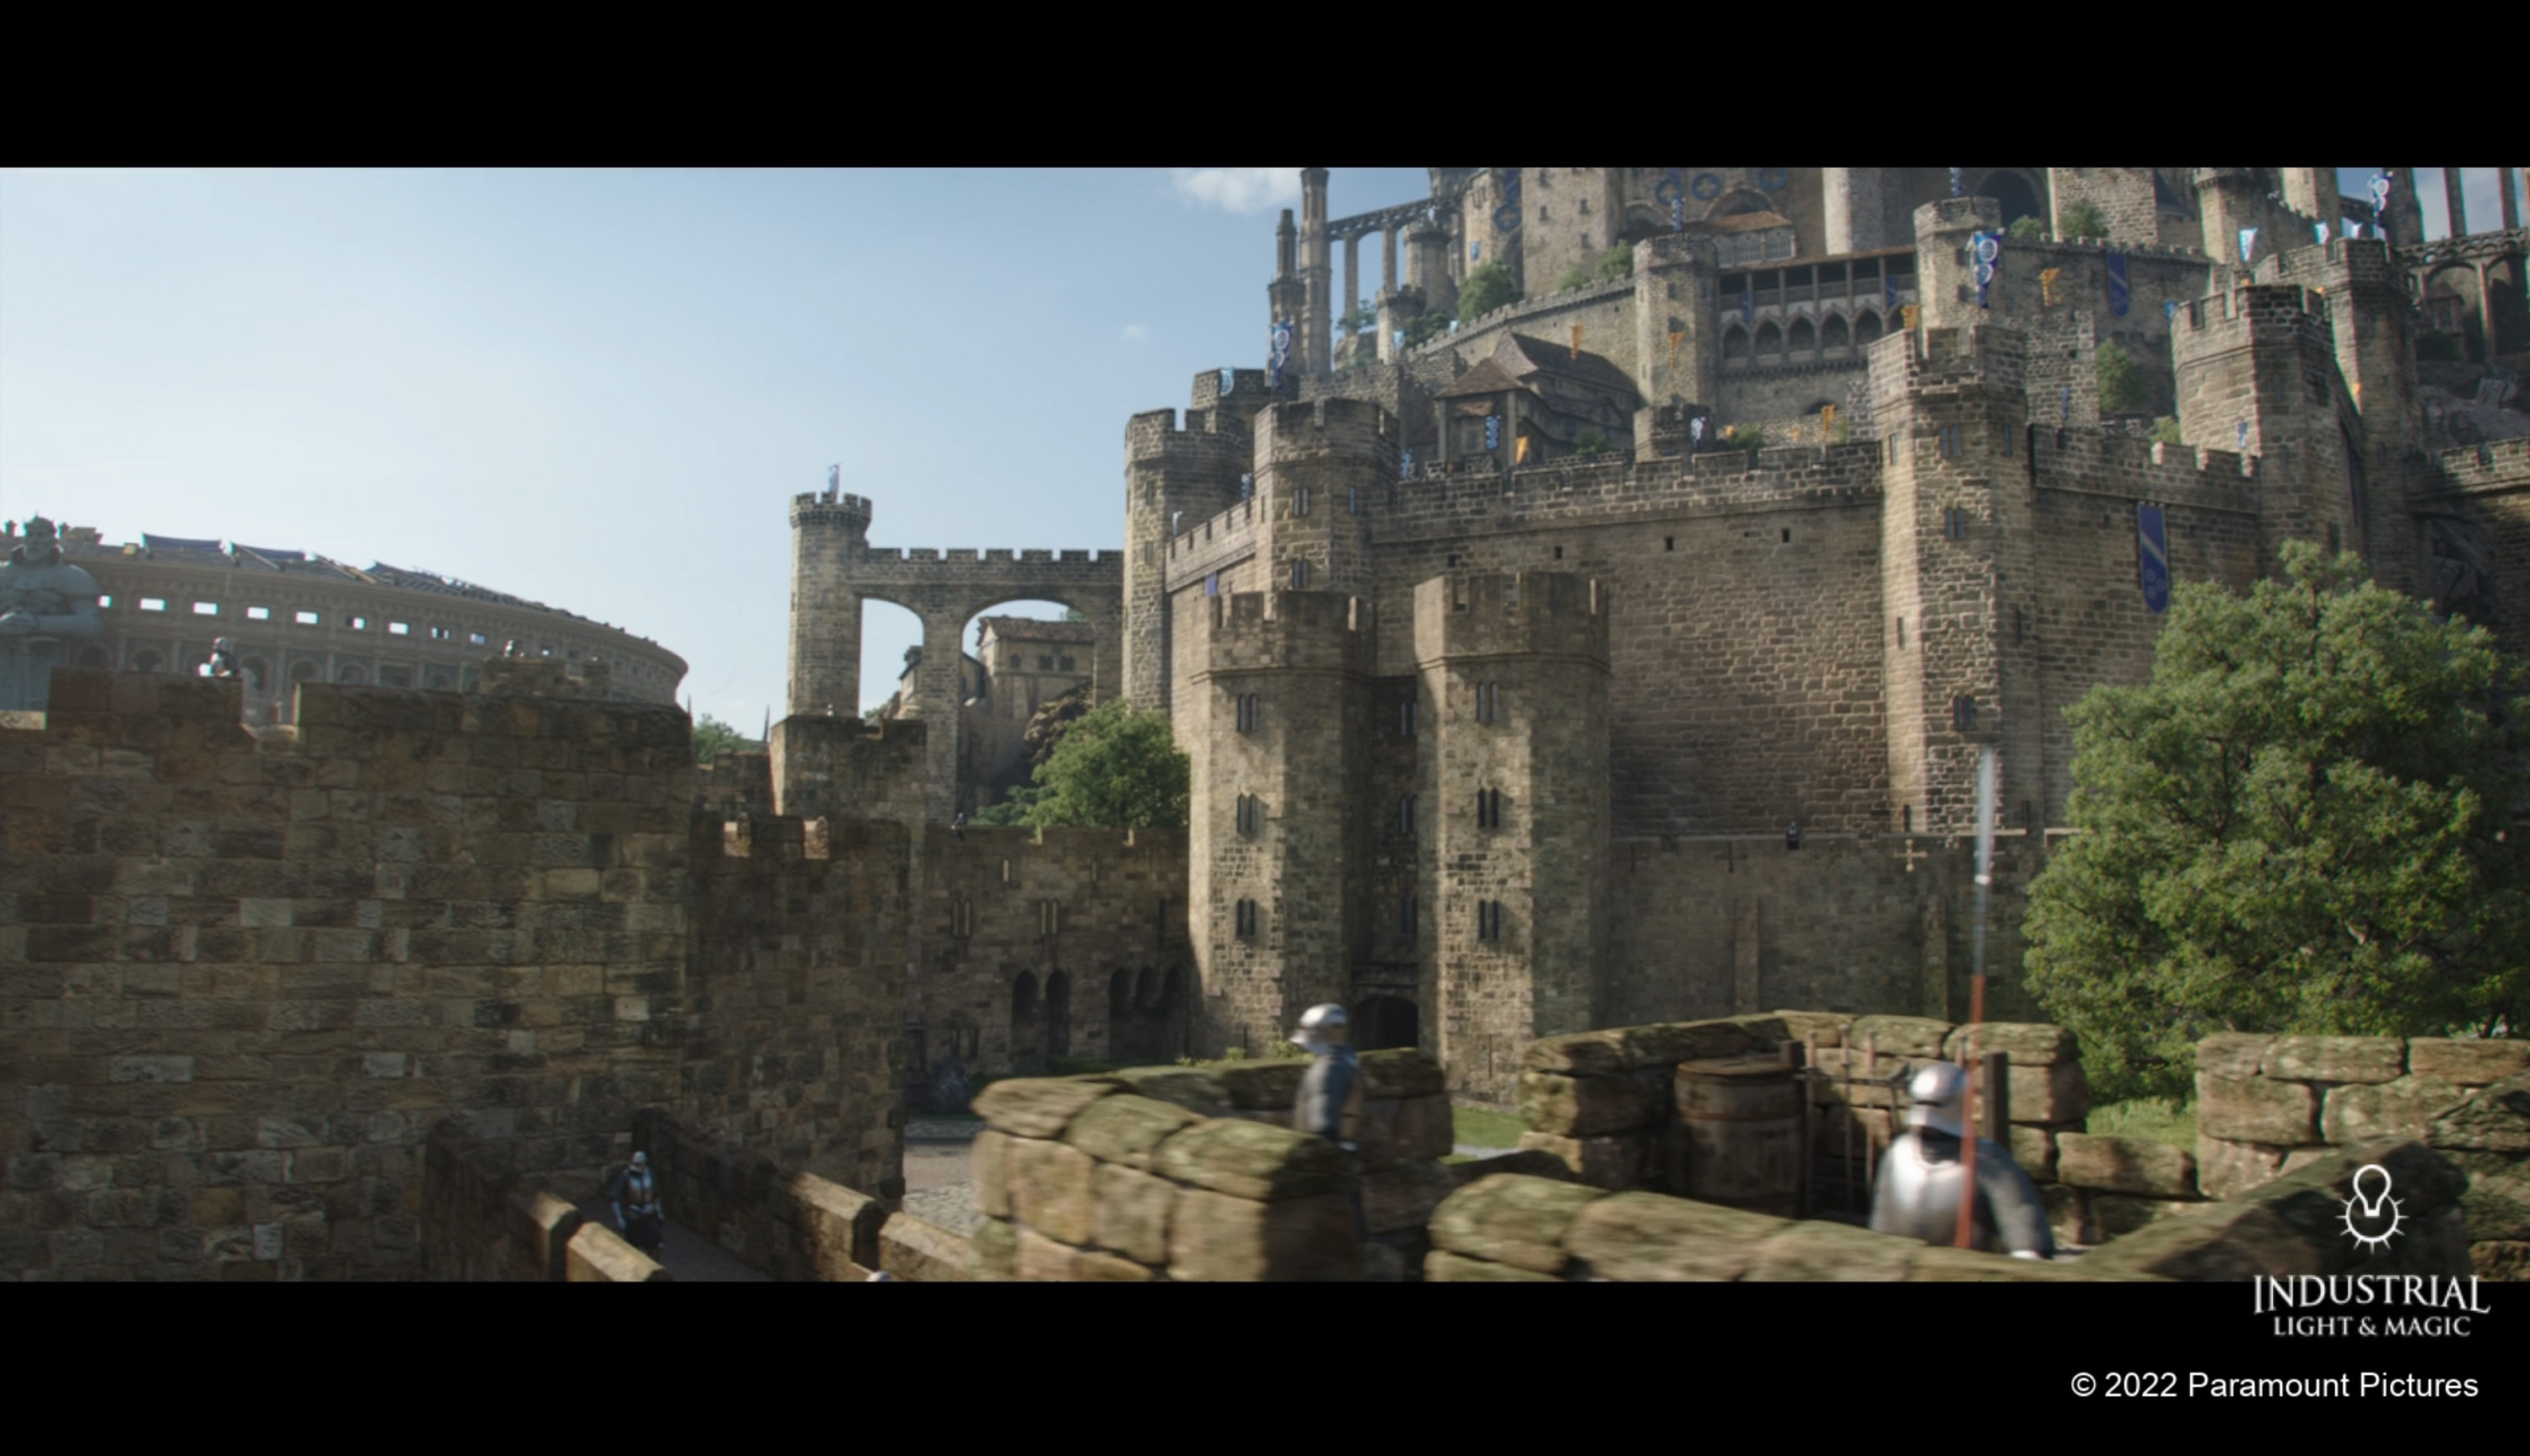 full cg shot, modeling and texturing of the front castle courtyard; vegetation, front tower modelling and surfacing